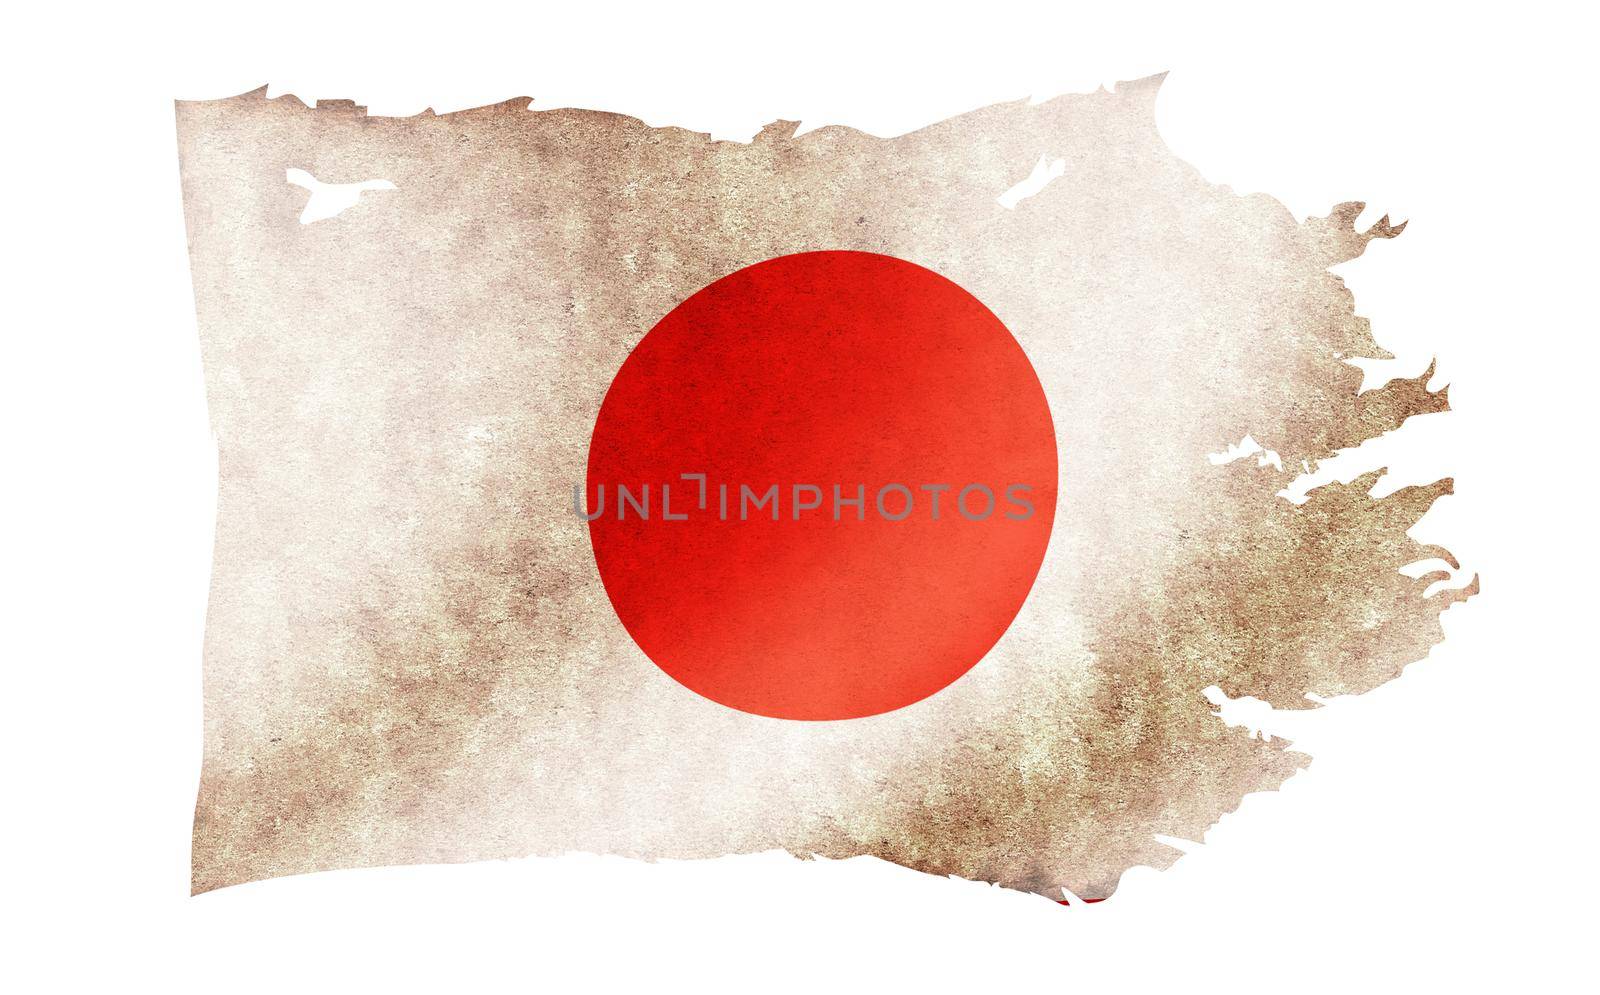 Dirty and torn country flag illustration / Japan by barks